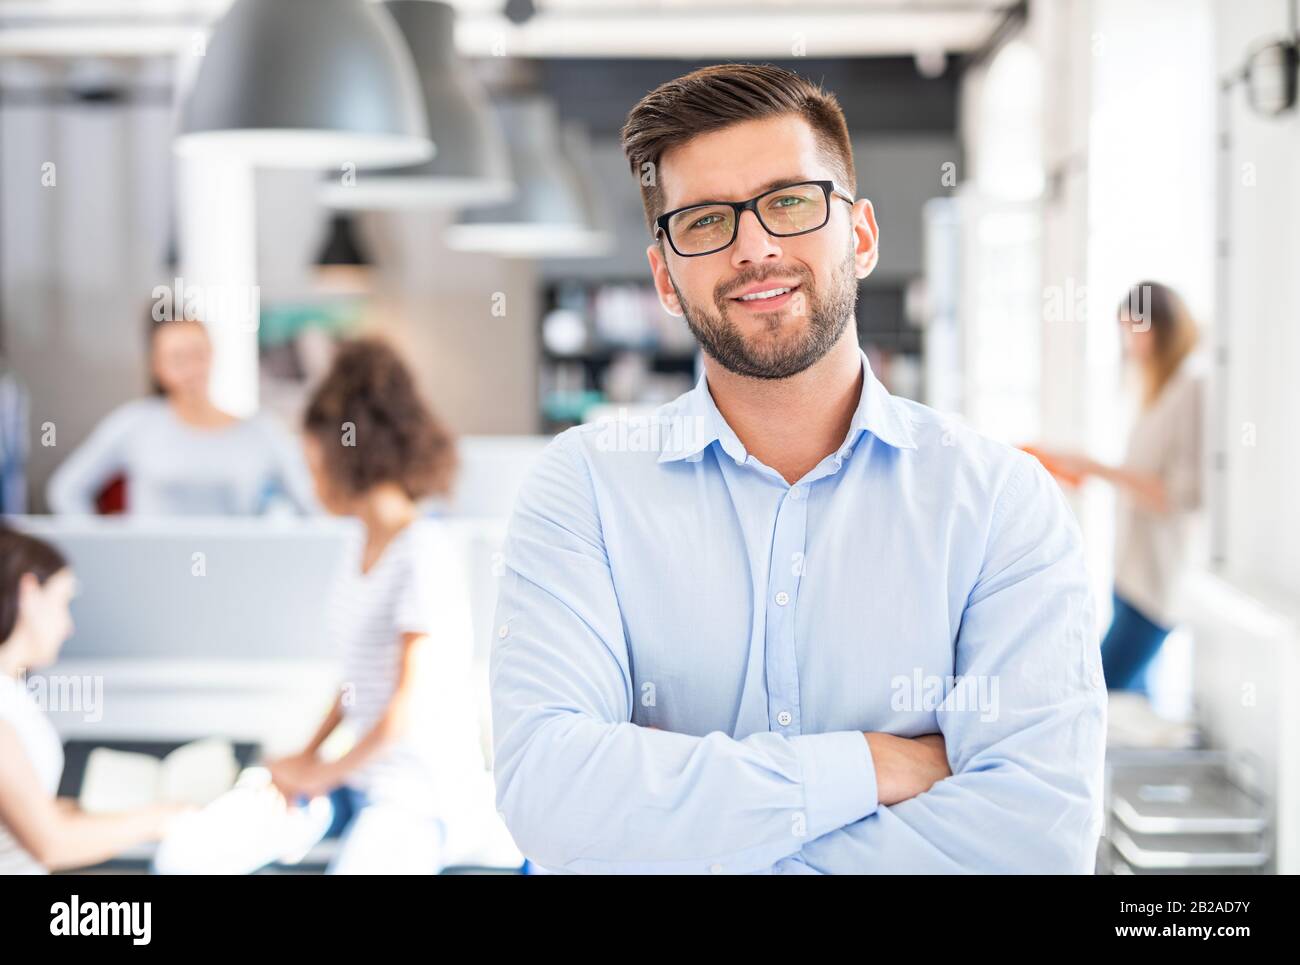 Portrait of young confident man leader standing in office. New start up business concept. Stock Photo